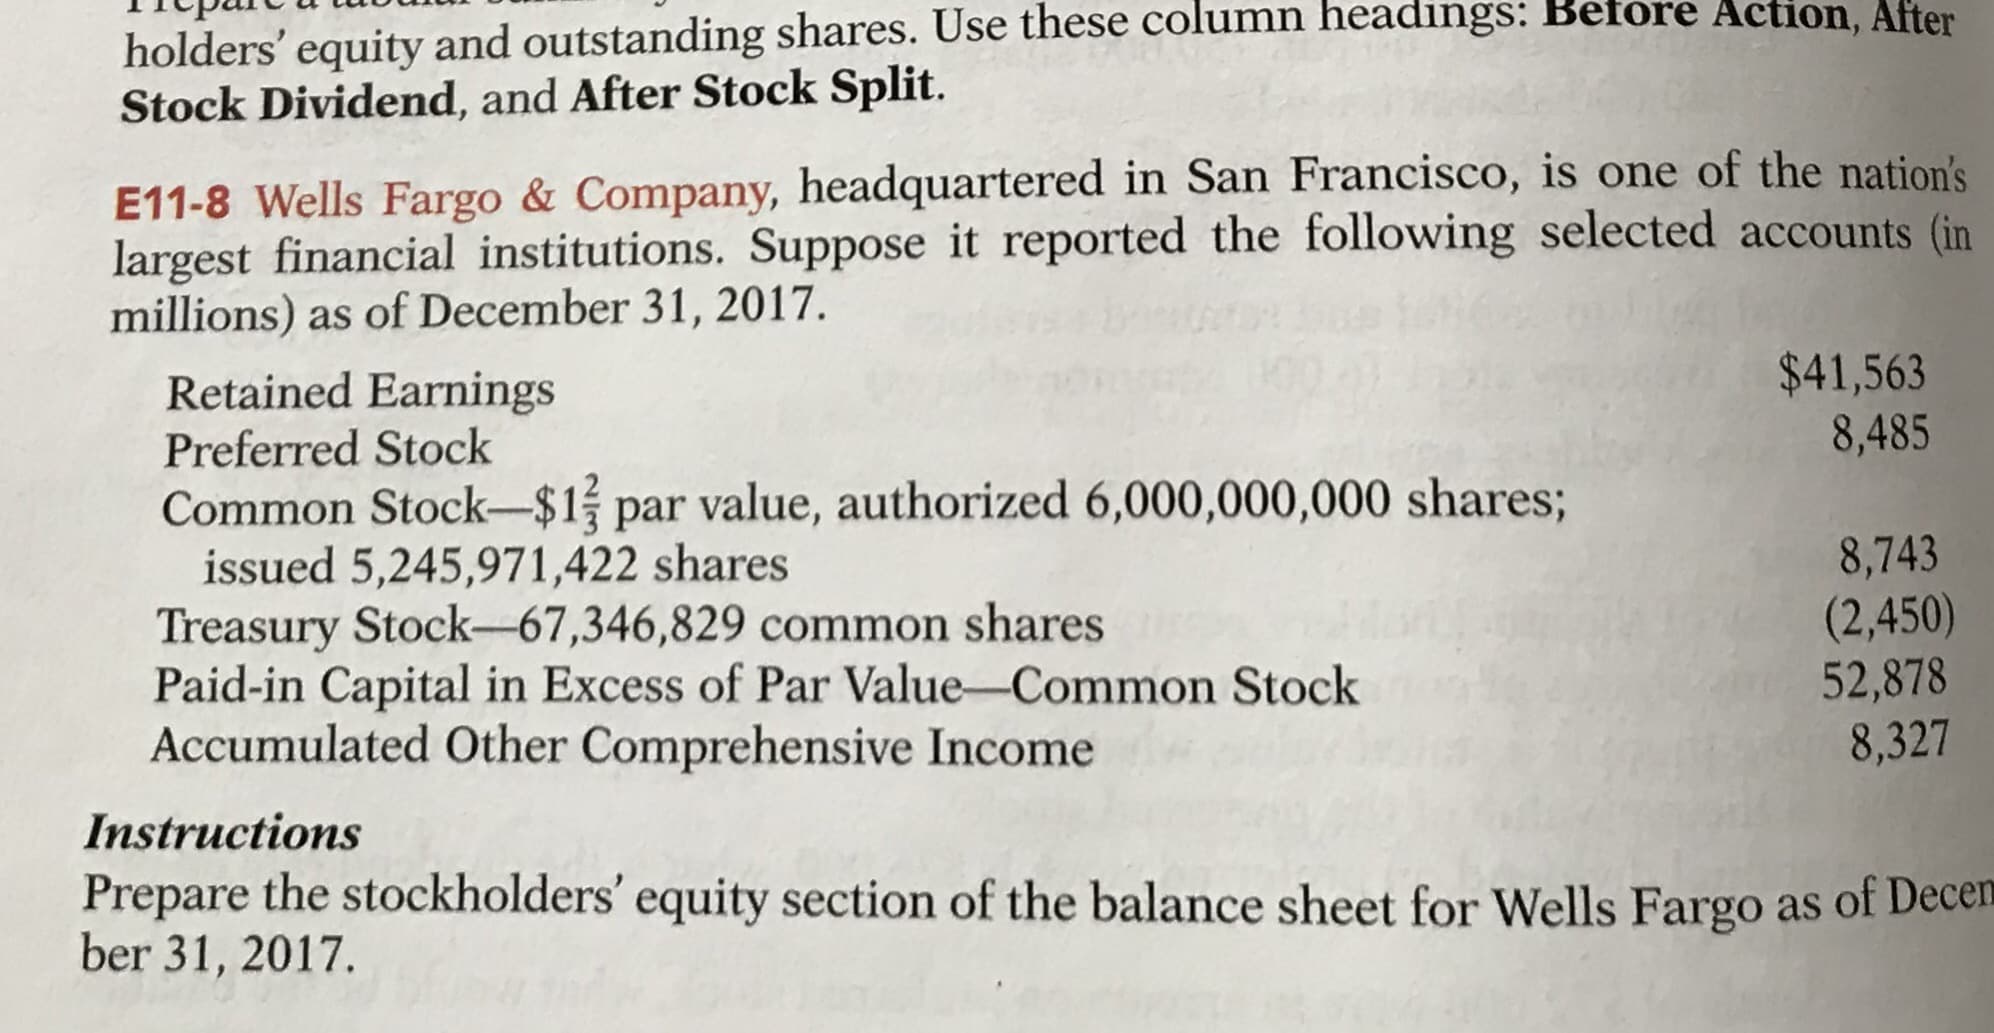 holders' equity and outstanding shares. Use these column headings: Before Action, After
Stock Dividend, and After Stock Split.
E11-8 Wells Fargo & Company, headquartered in San Francisco, is one of the nation's
largest financial institutions. Suppose it reported the following selected accounts (in
millions) as of December 31, 2017.
$41,563
8,485
Retained Earnings
Preferred Stock
Common Stock-$1 par value, authorized 6,000,000,000 shares;
issued 5,245,971,422 shares
Treasury Stock-67,346,829 common shares
Paid-in Capital in Excess of Par Value-Common Stock
Accumulated Other Comprehensive Income
8,743
(2,450)
52,878
8,327
Instructions
Prepare the stockholders' equity section of the balance sheet for Wells Fargo as of Decen
ber 31, 2017.
